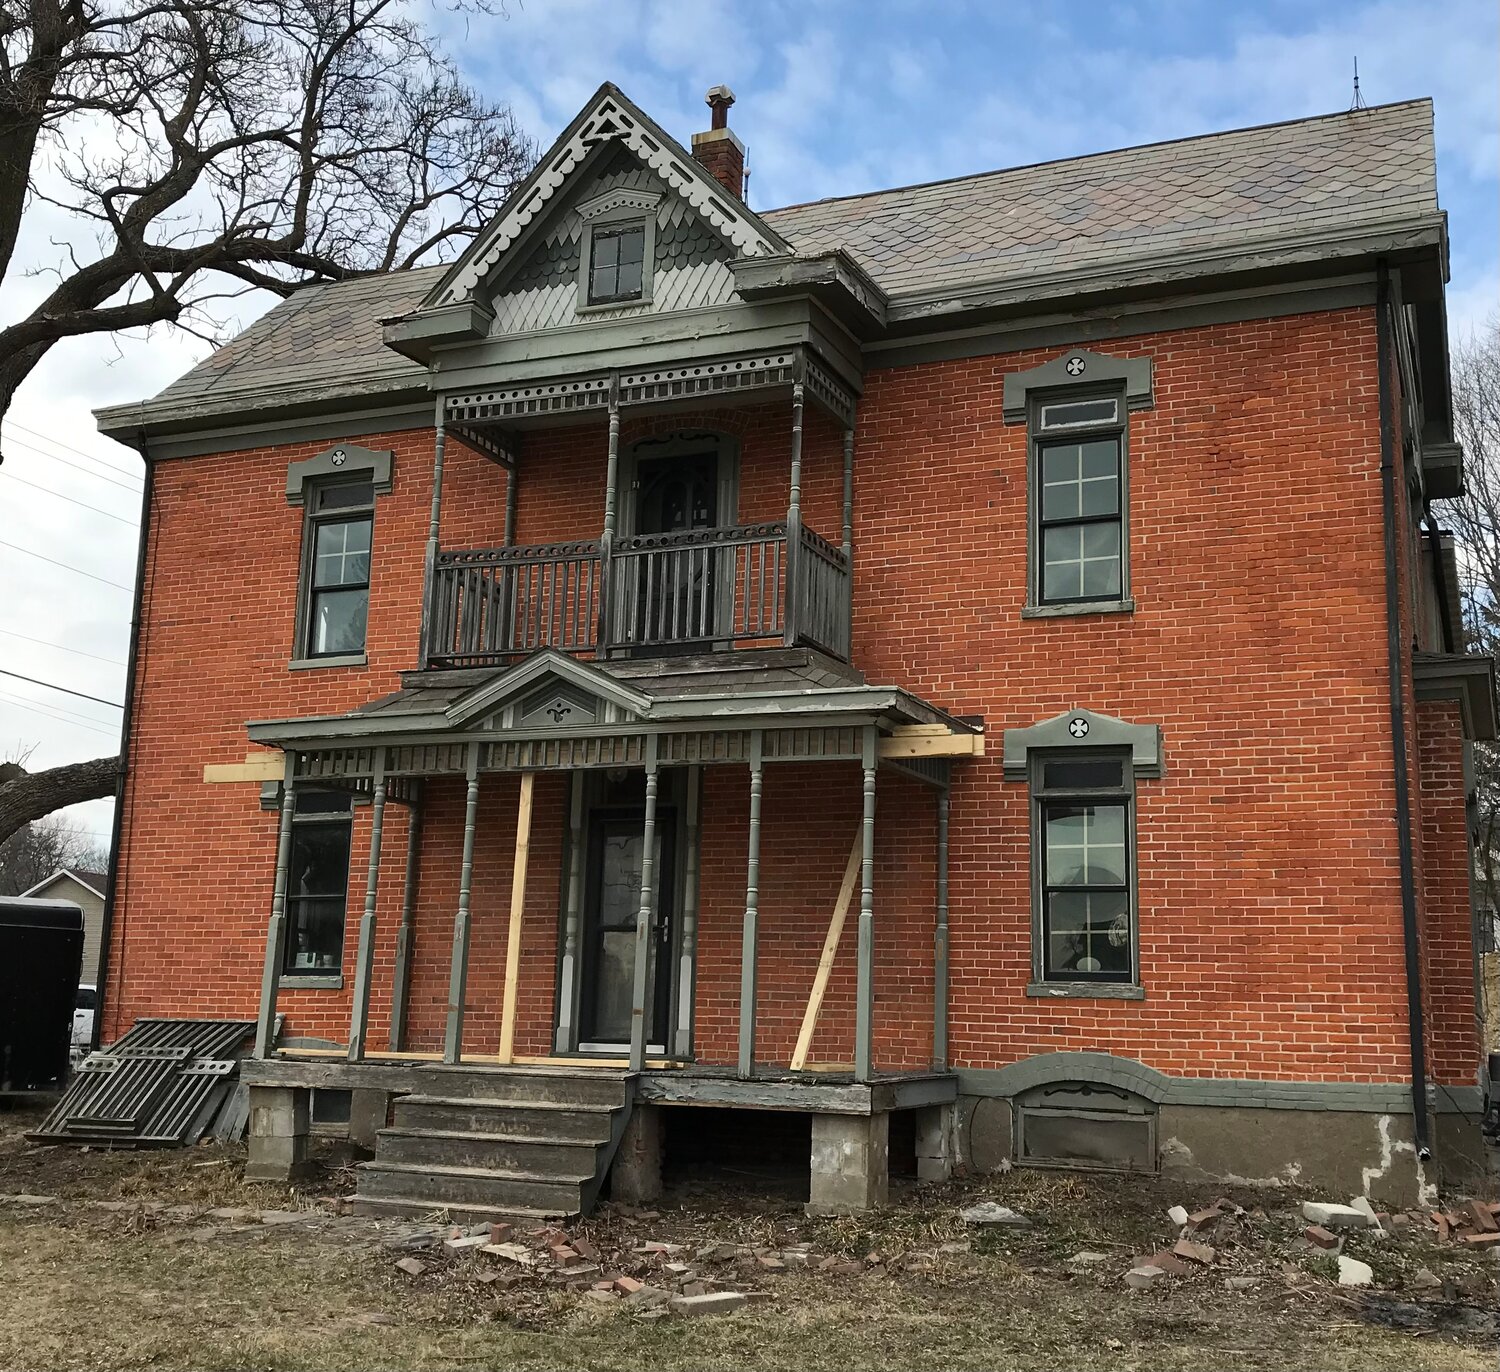 A view of the Swift House as you drive by on Highway 22 through Riverside.  The stairs are being replaced and restored and there is still work to finish on closing up the basement and under the front porch.